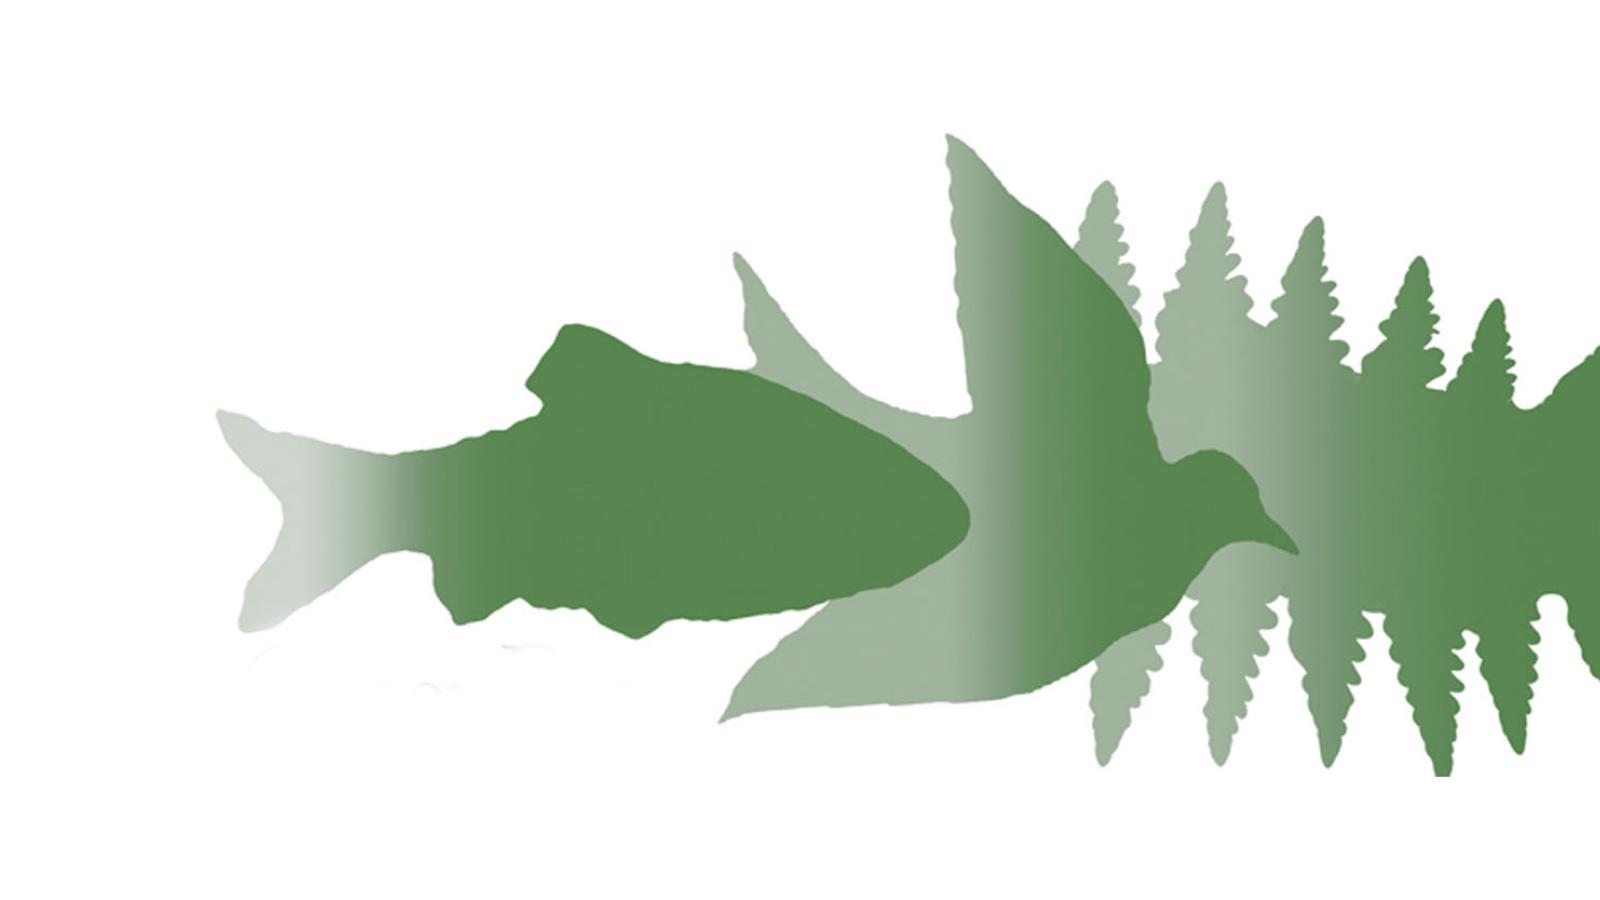 Silhouette of fish, bird, and tree